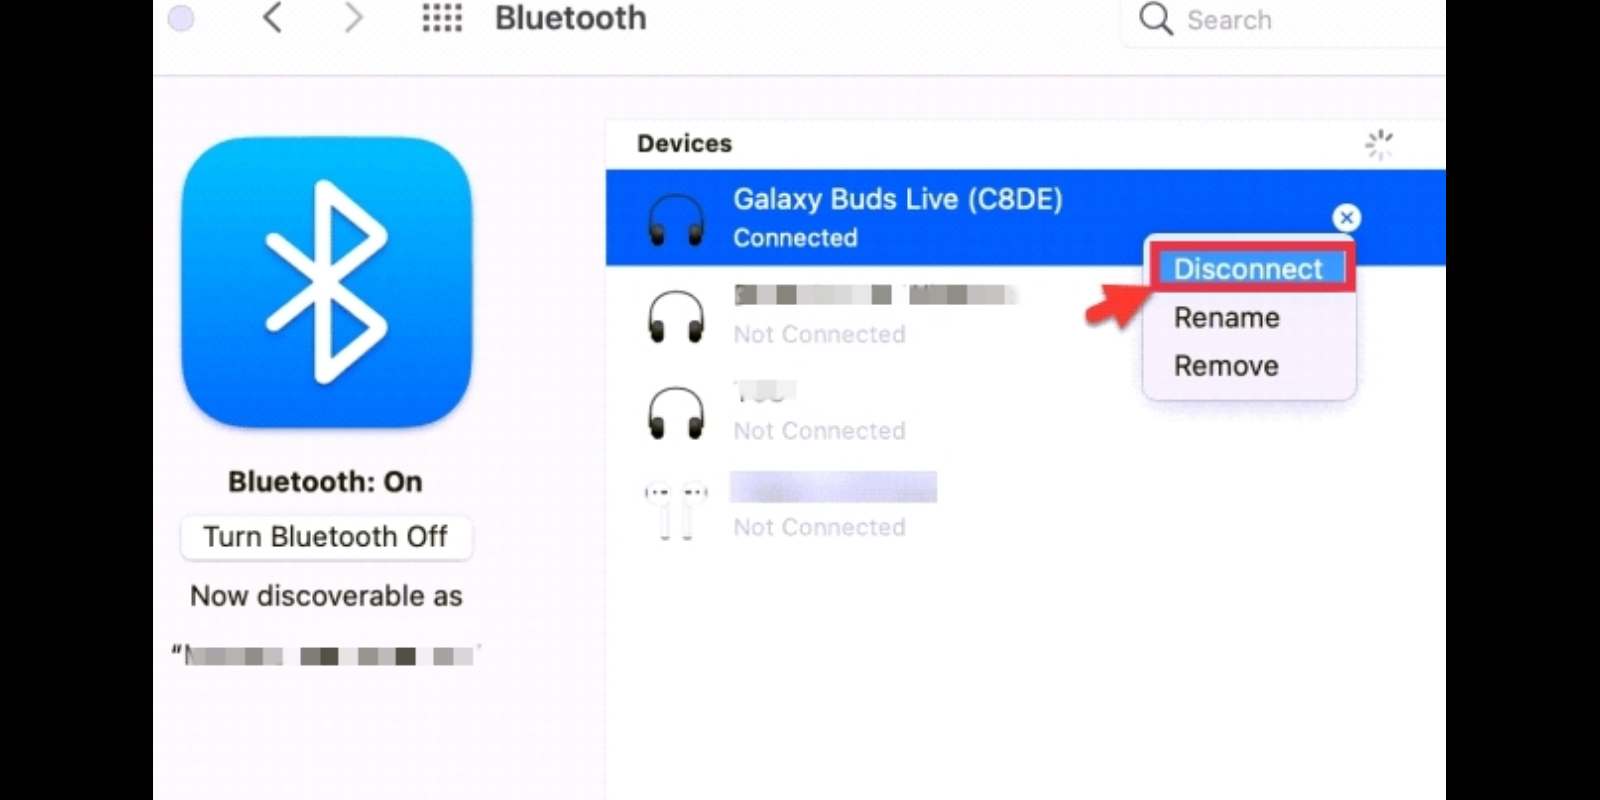 disconnecting the Galaxy Buds from Mac or MacBook
